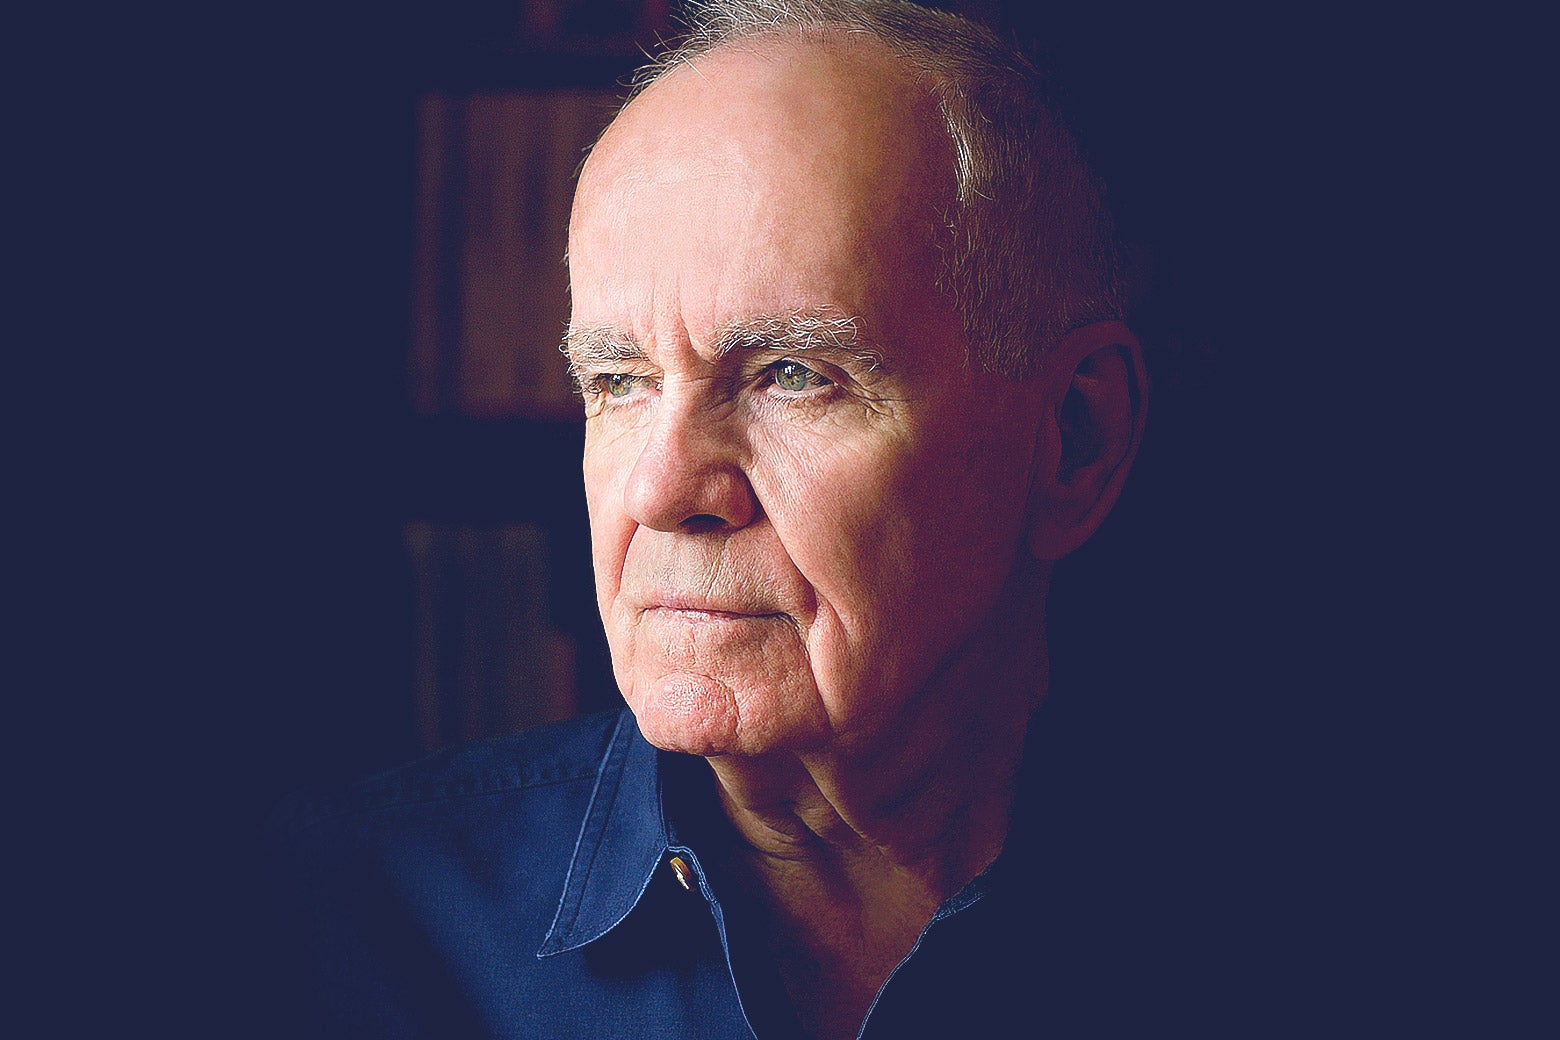 Cormac McCarthy in a collared blue shirt looking off into the distance.